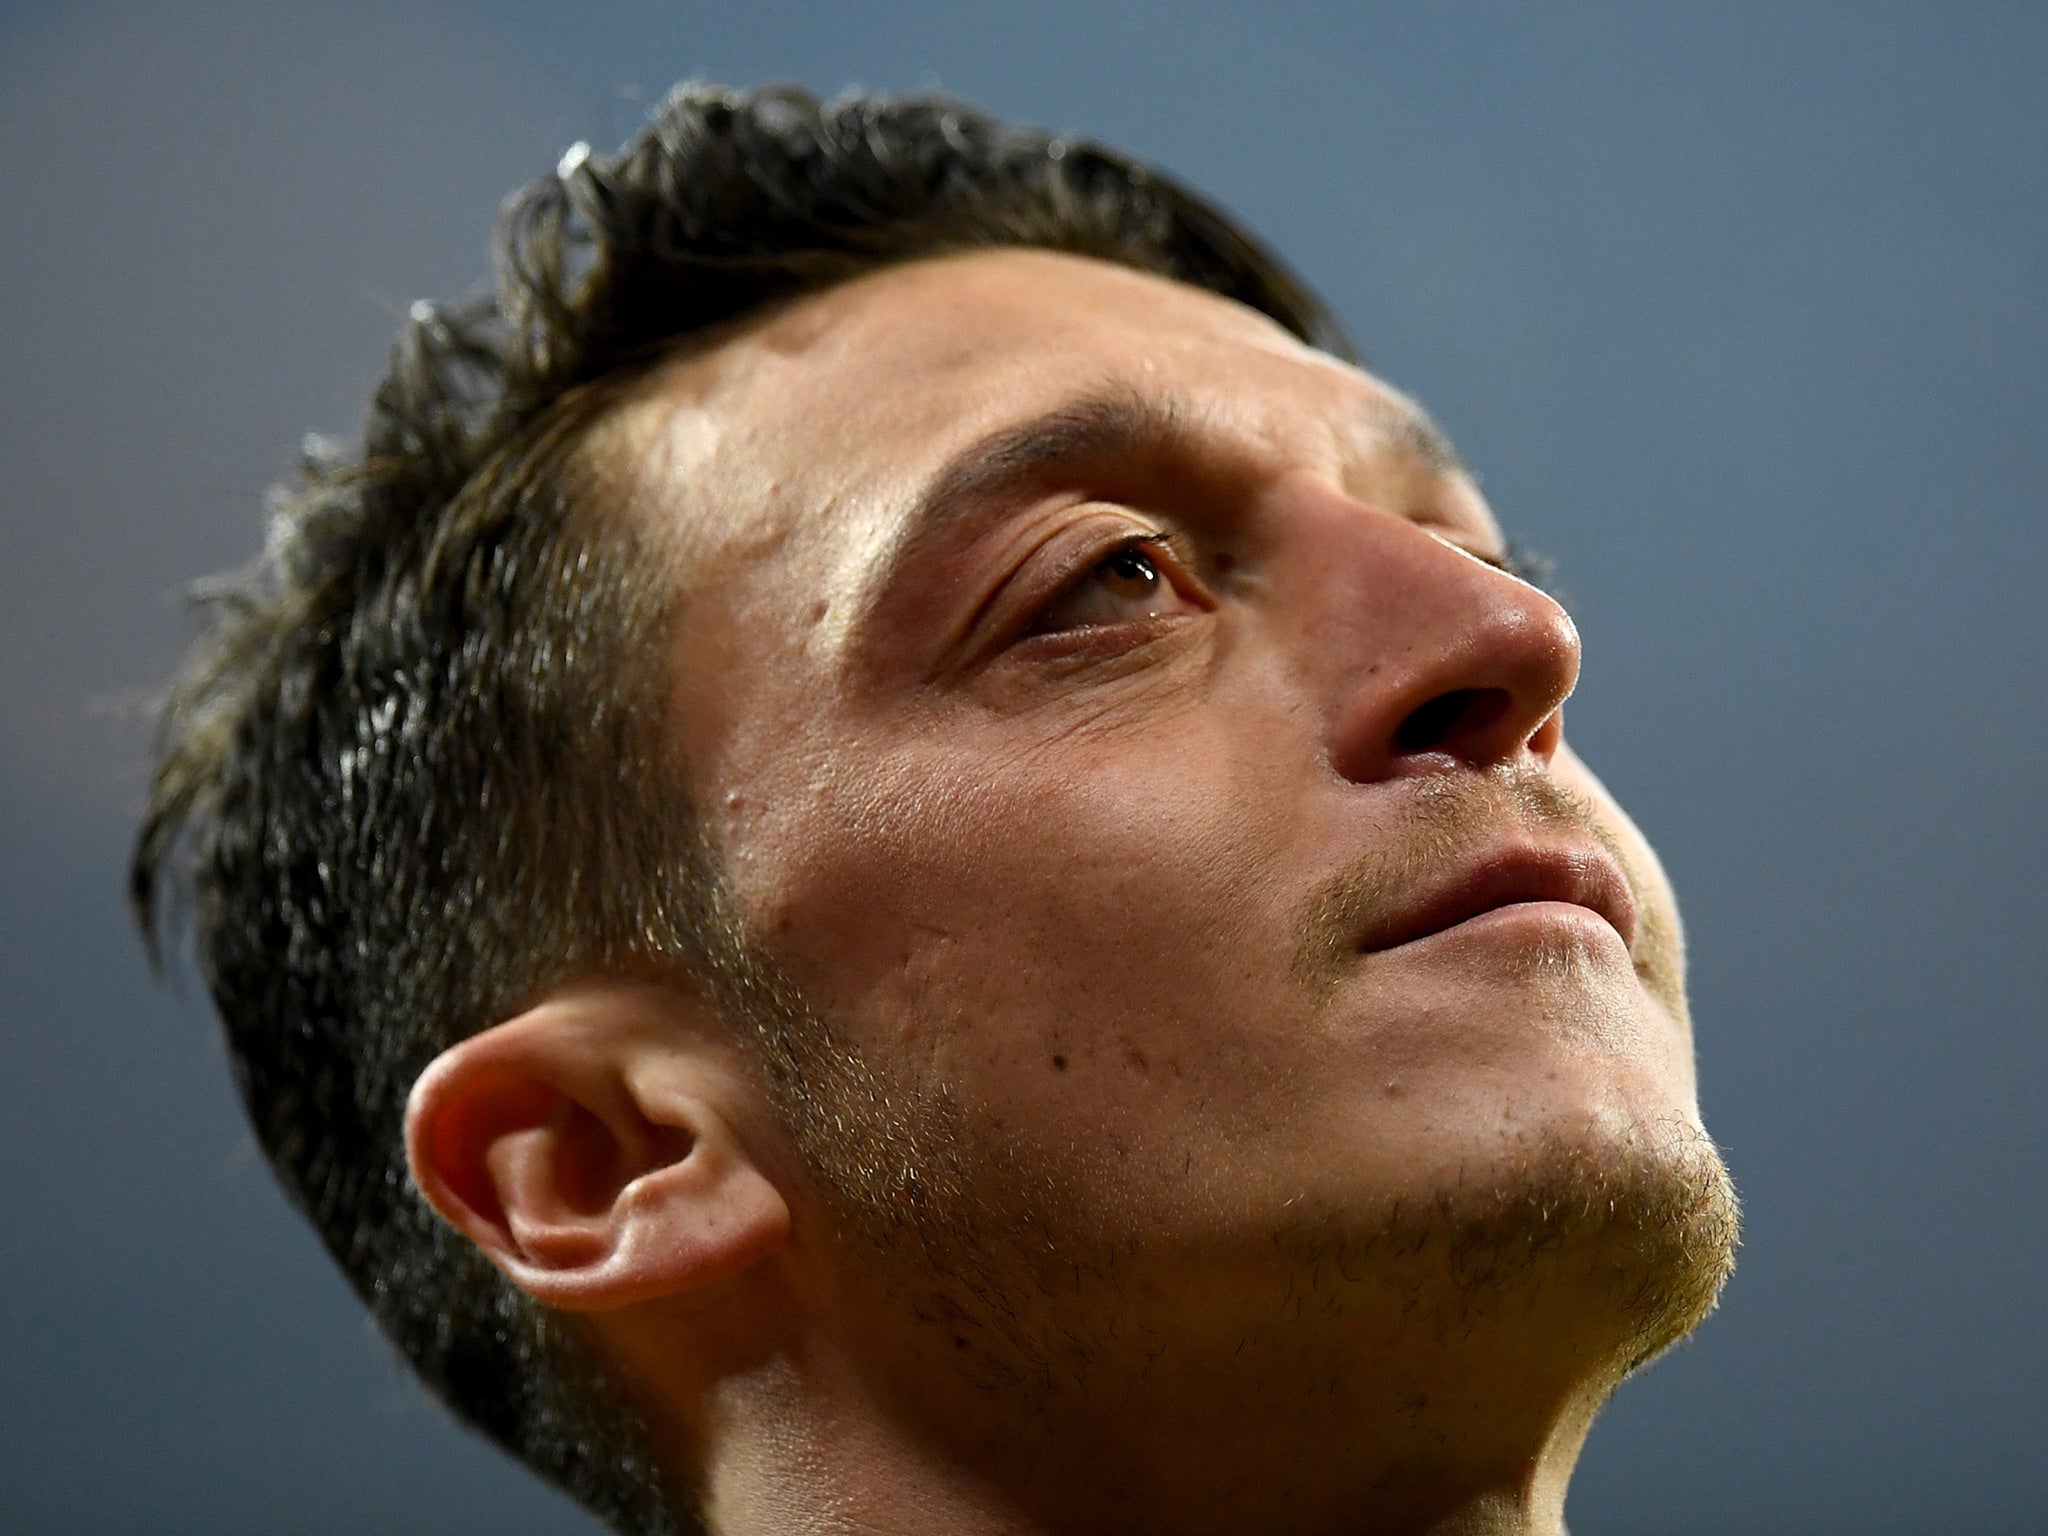 Mesut Özil eventually joined Real Madrid for a fee in the region of €15million